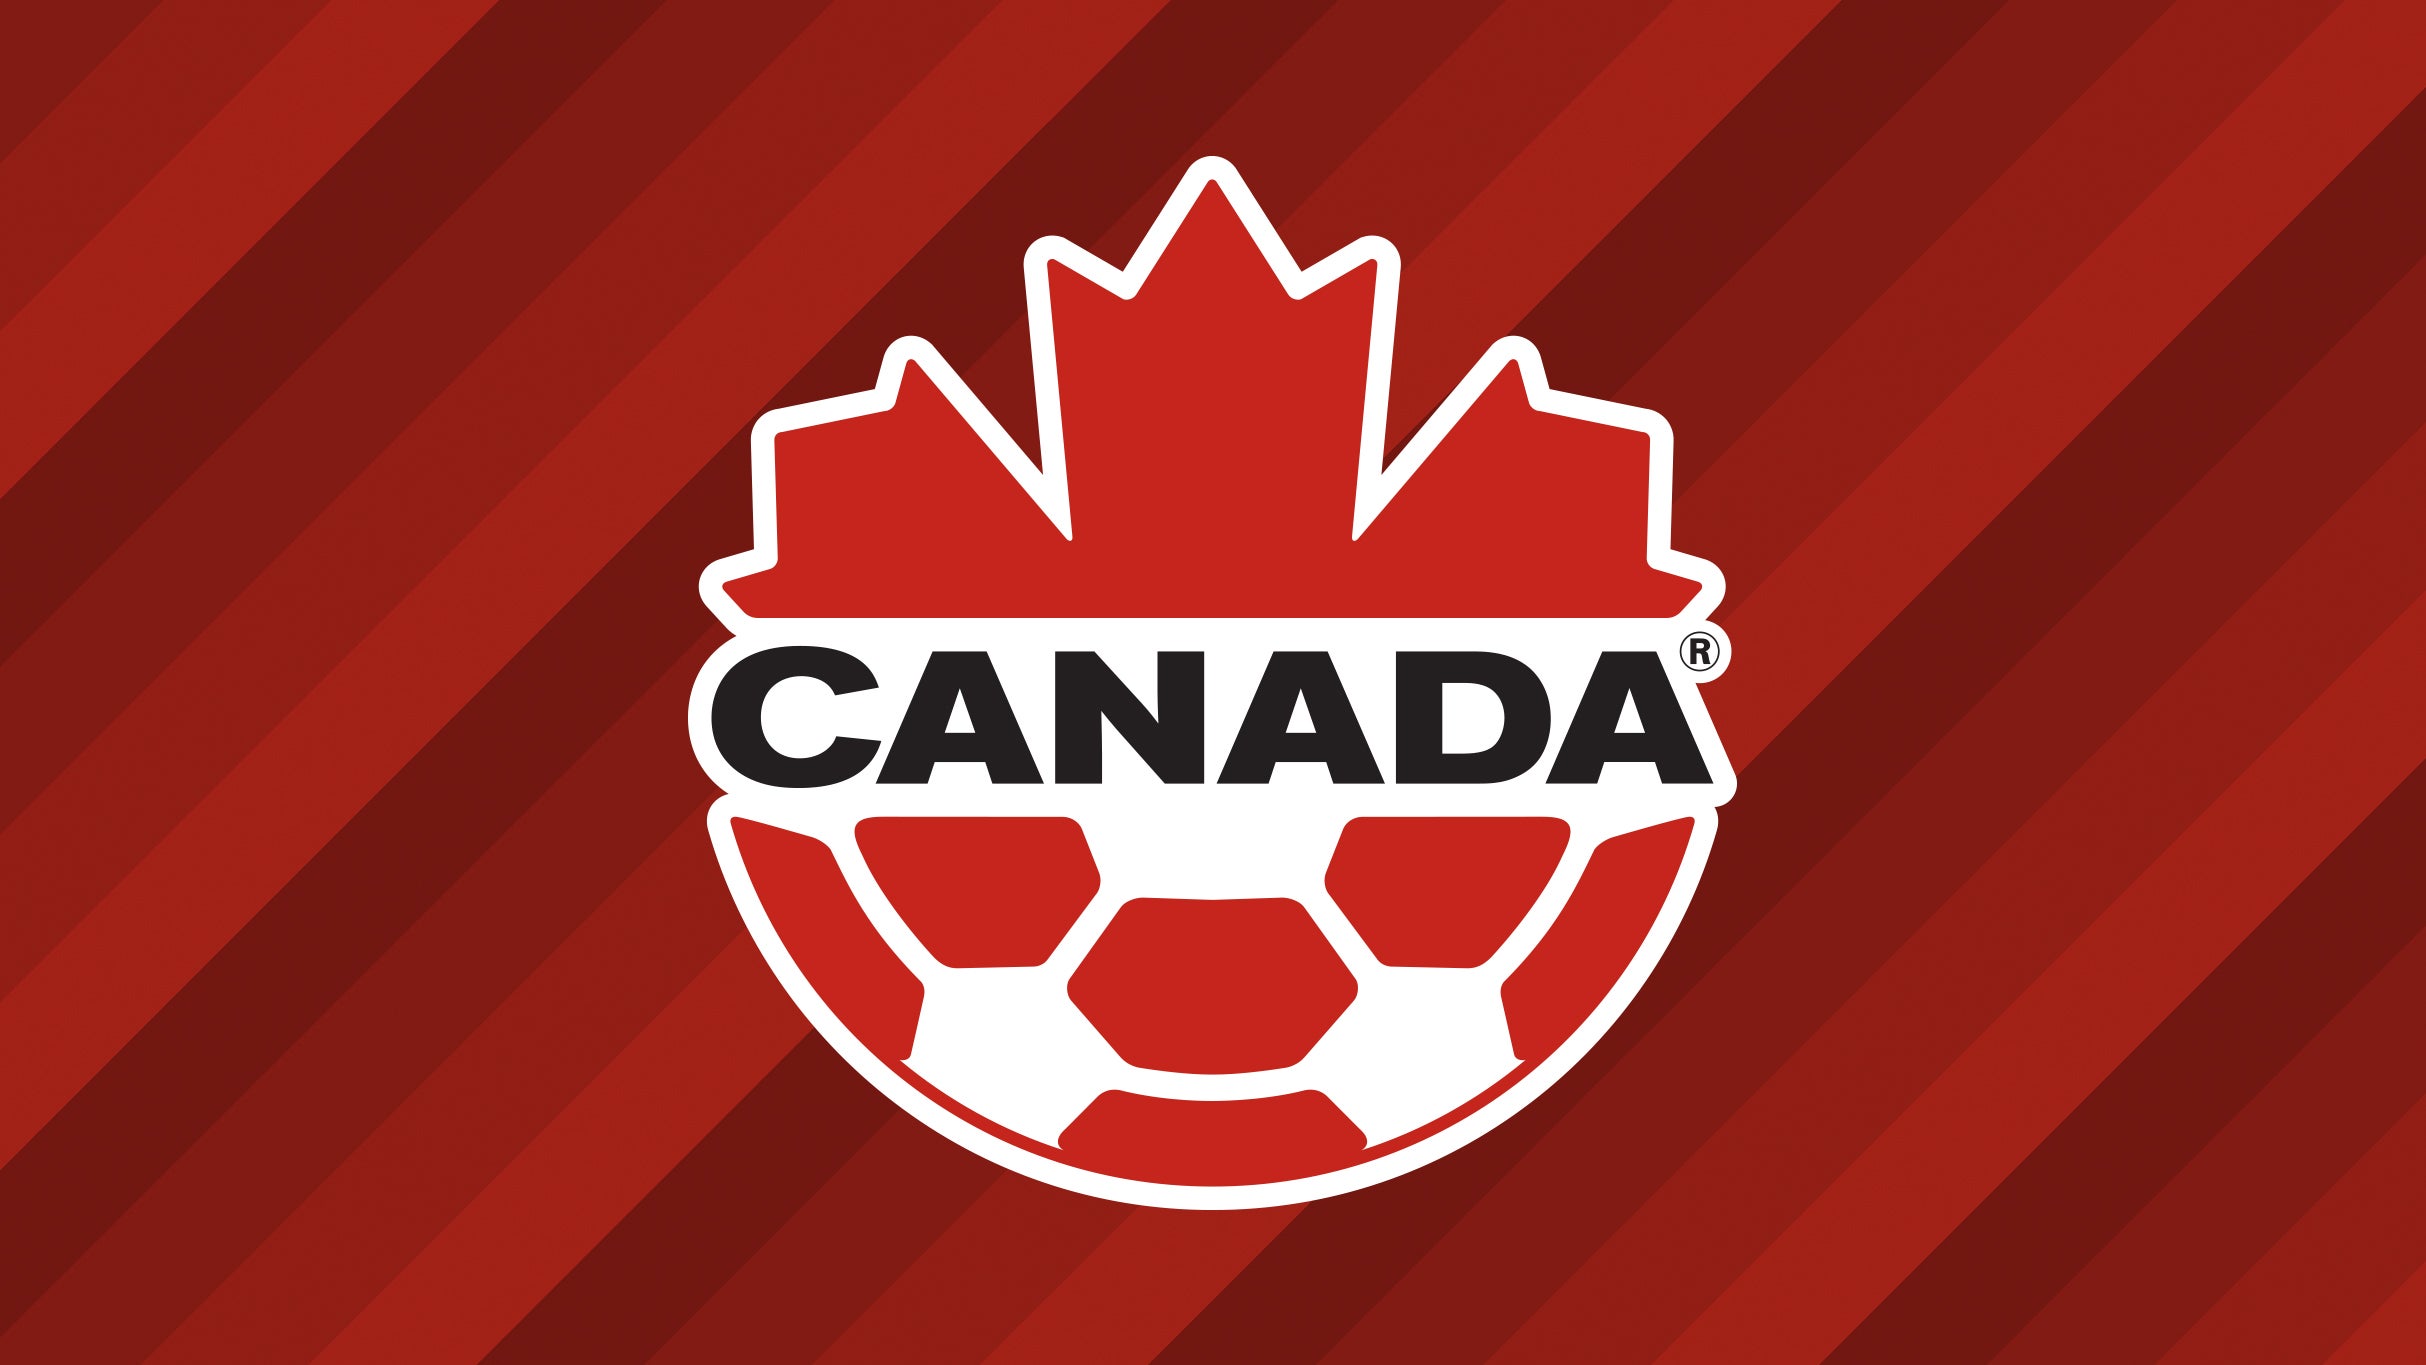 Canada WNT v MEX - Summer Send off Series in Toronto promo photo for TFC Member presale offer code